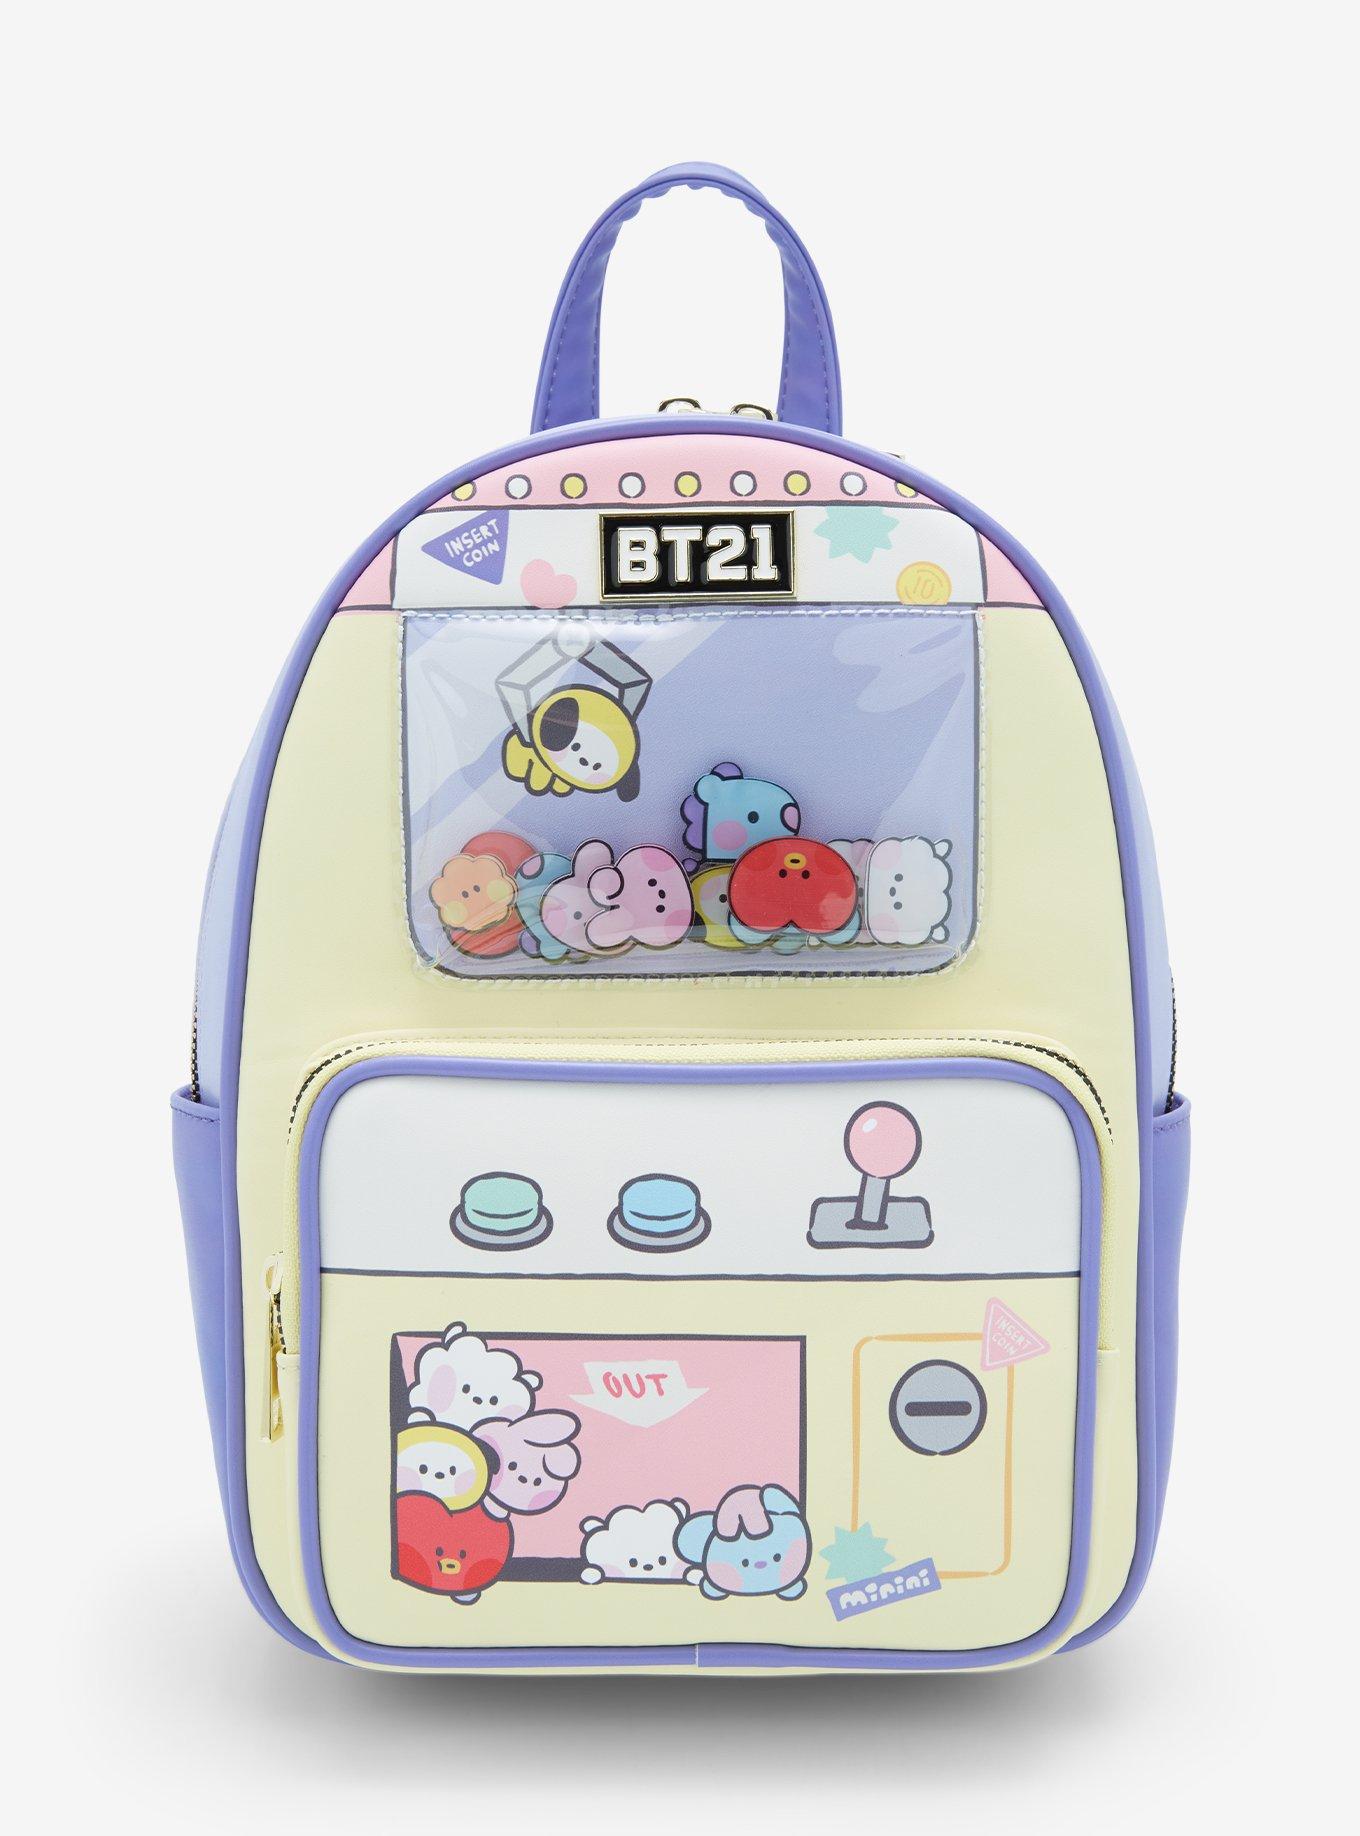 ★BT21 by BTS OFFICIAL★BT21 minini Figure Key Ring/ Key Chain/ Key Holder/  Point Accessories